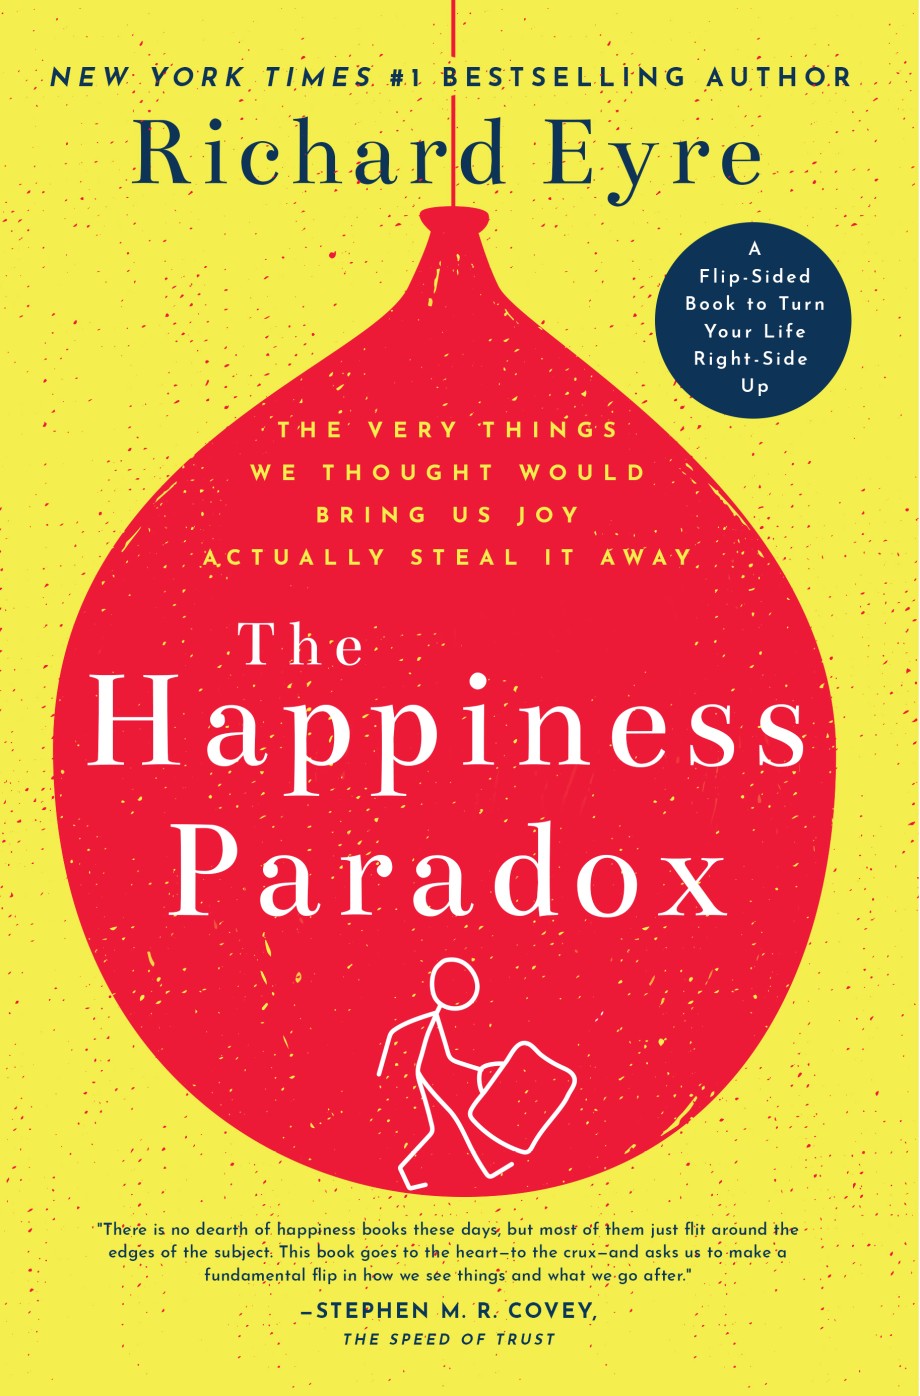 Happiness Paradox The Happiness Paradigm The Very Things We Thought Would Bring Us Joy Actually Steal It Away.